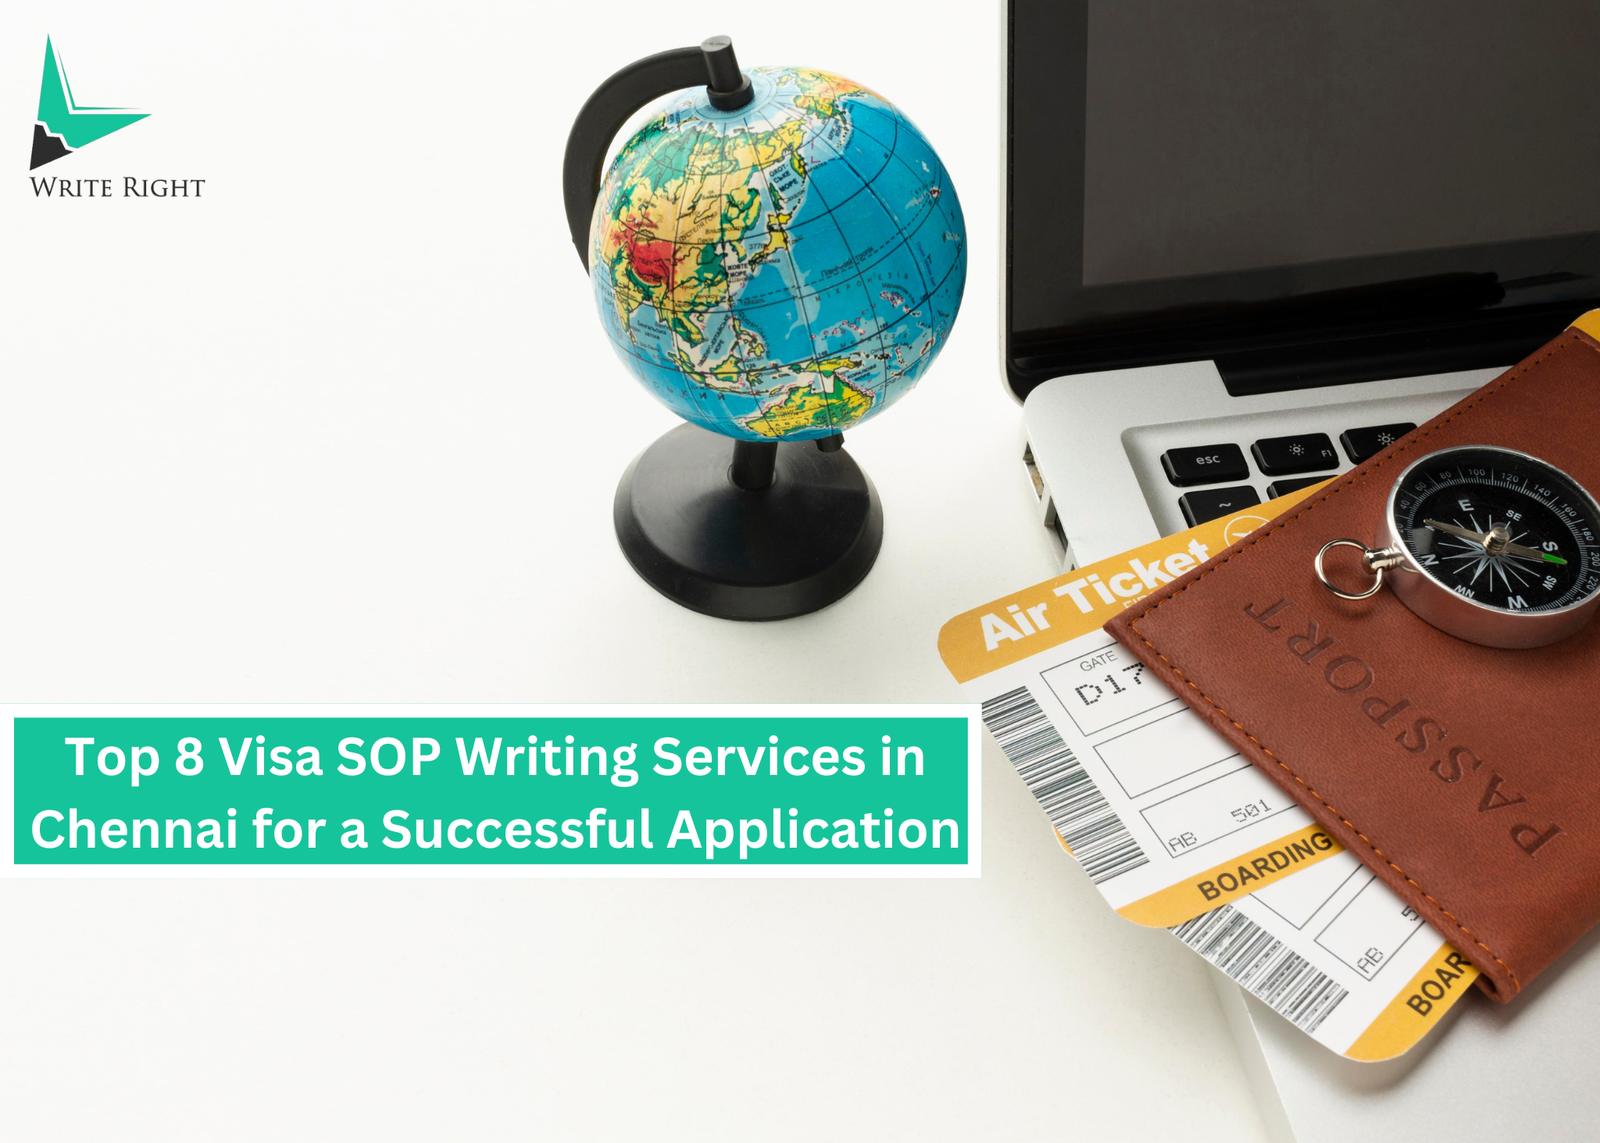 Top 8 Visa SOP Writing Services in Chennai for a Successful Application